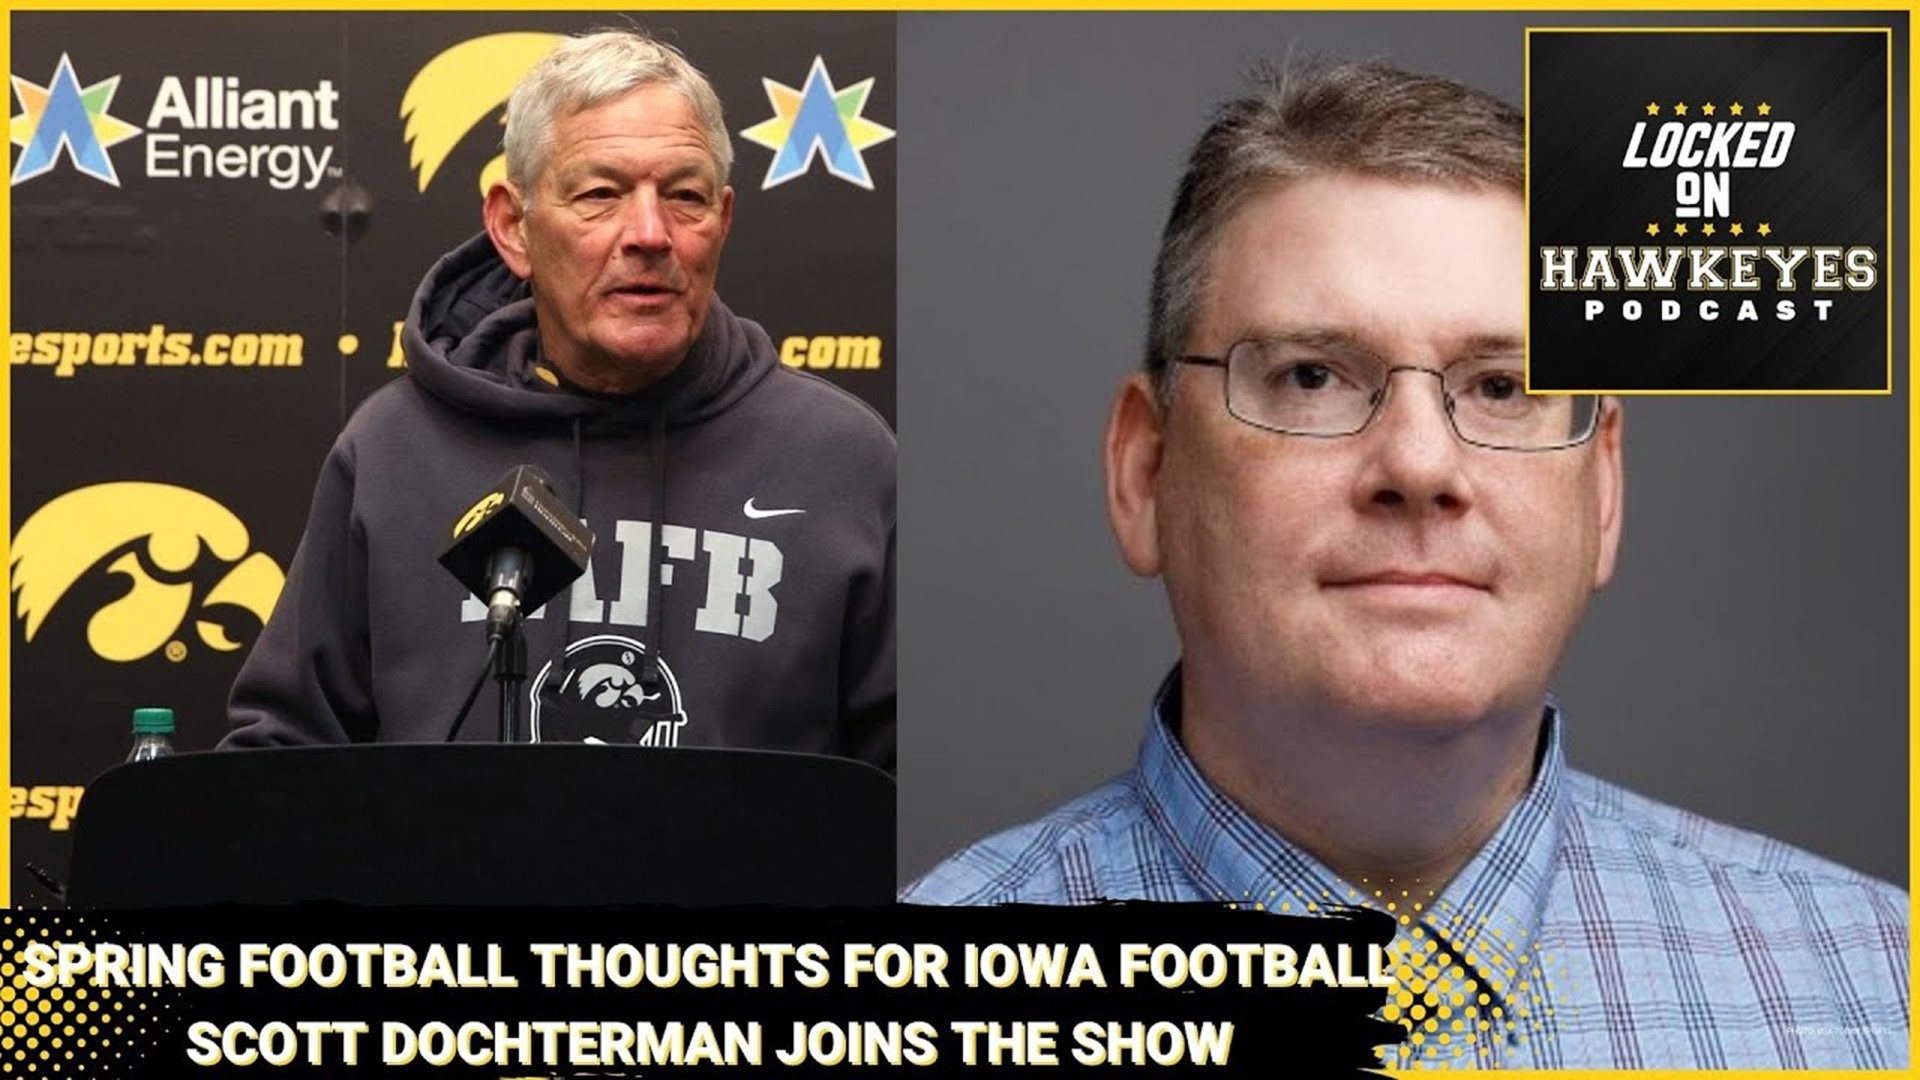 Iowa Football Open Practice thoughts, Scott Dochterman joins the show